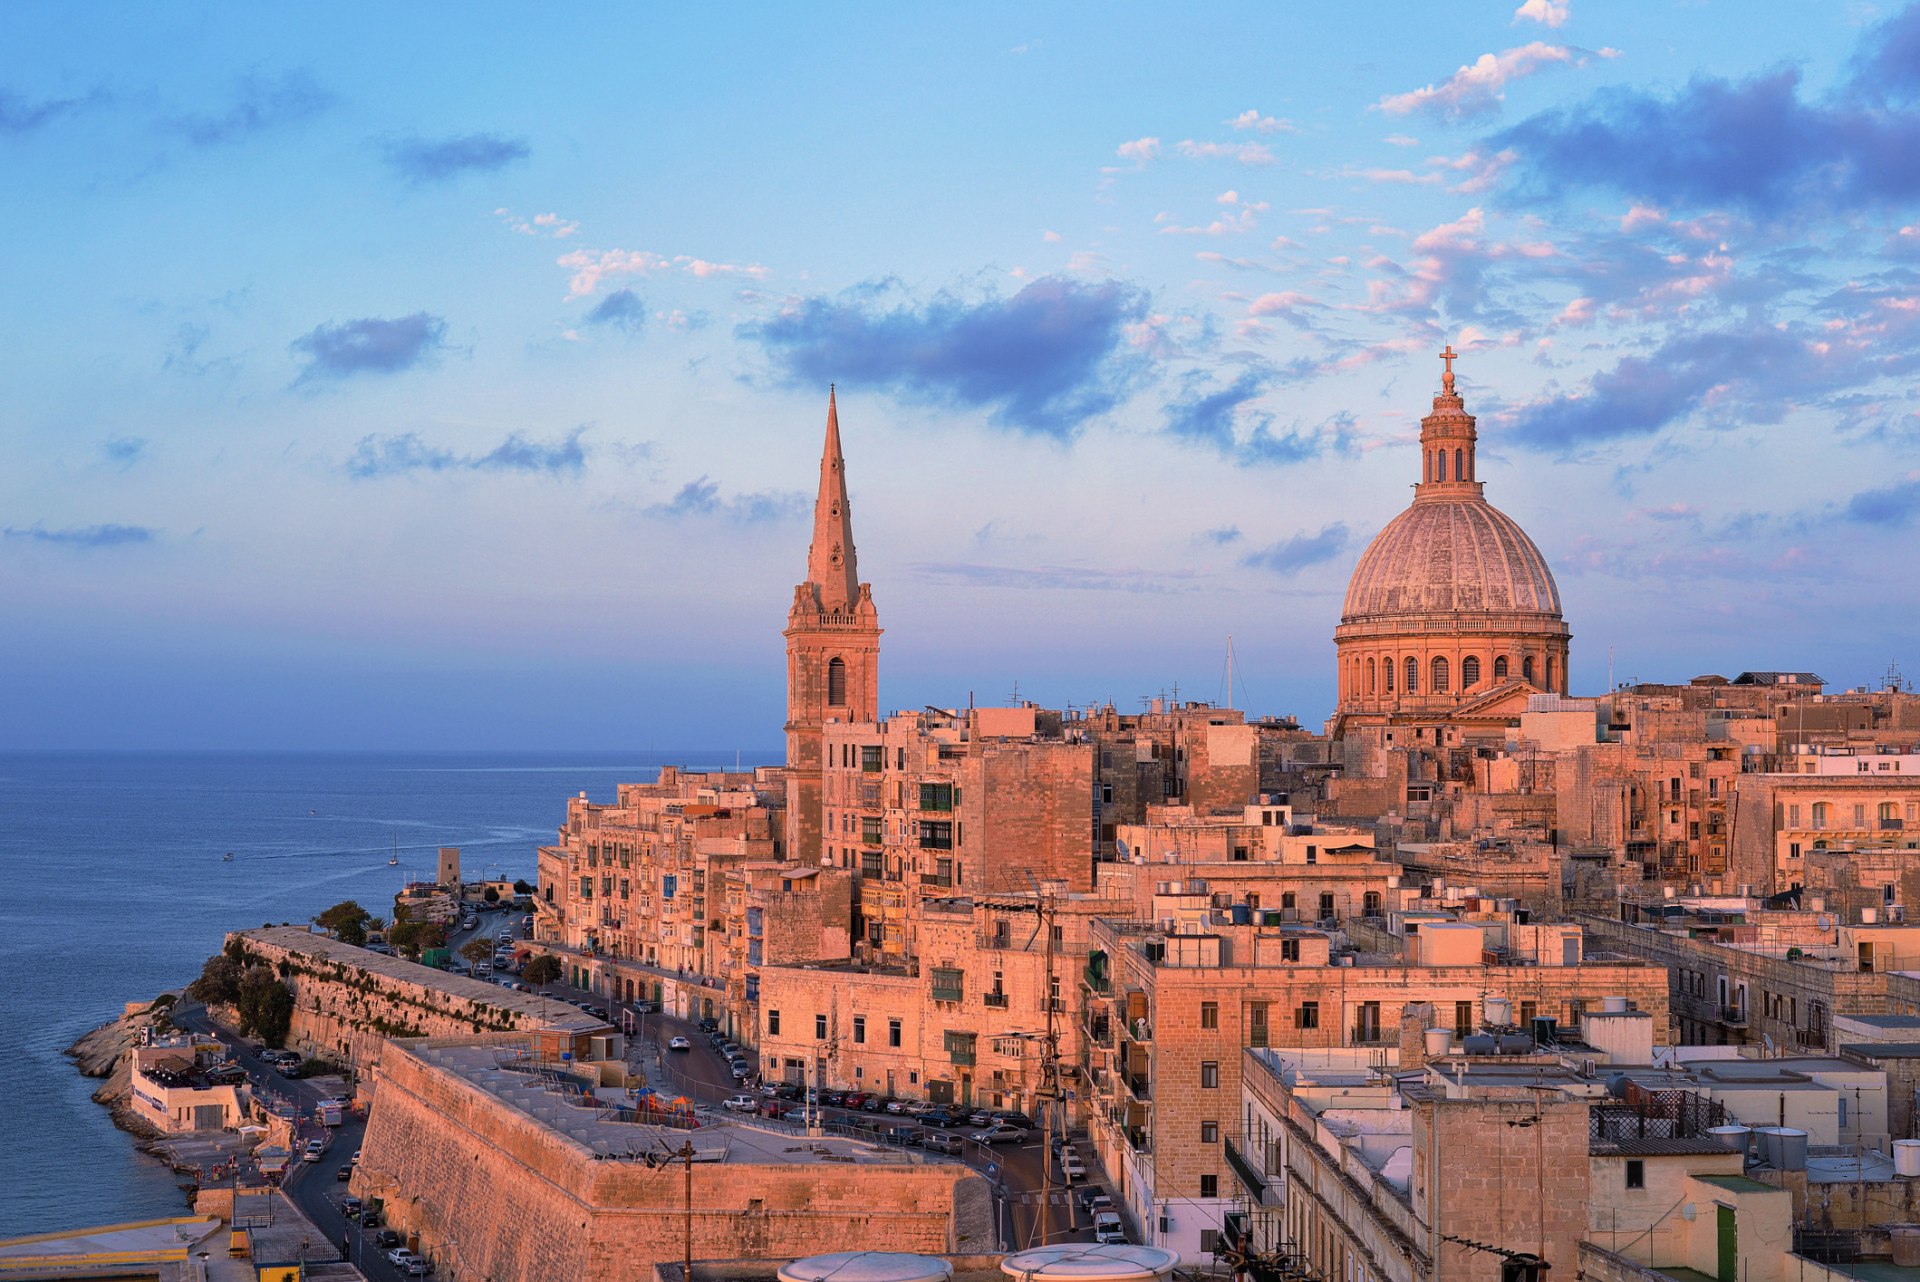 This Mediterranean marvel of Malta has been the shooting ground for many filmmakers. Most notably, though, is the recent sequel to the 2000 blockbuster ‘Gladiator,’ which sees beautiful Valletta—a UNESCO World Heritage Site—once again recreated into ancient Rome.<p>You may also like:<a href="https://www.starsinsider.com/n/322539?utm_source=msn.com&utm_medium=display&utm_campaign=referral_description&utm_content=701834en-us"> All the beautiful women Leonardo DiCaprio has romanced</a></p>